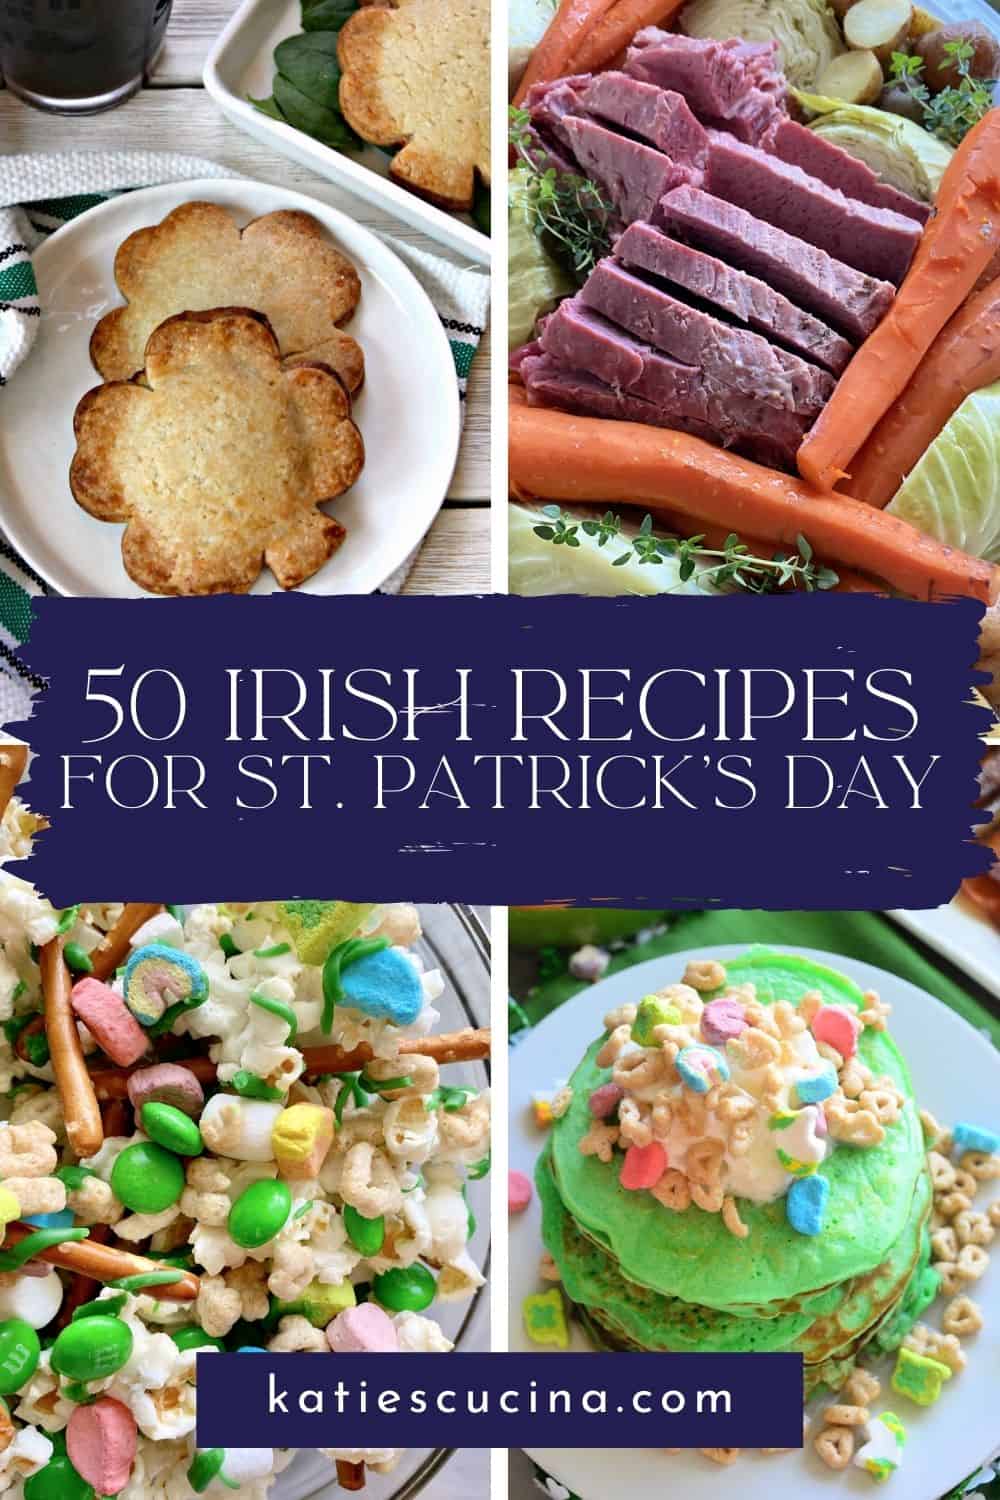 Four photos of Irish recipes with text on image for Pinterest.